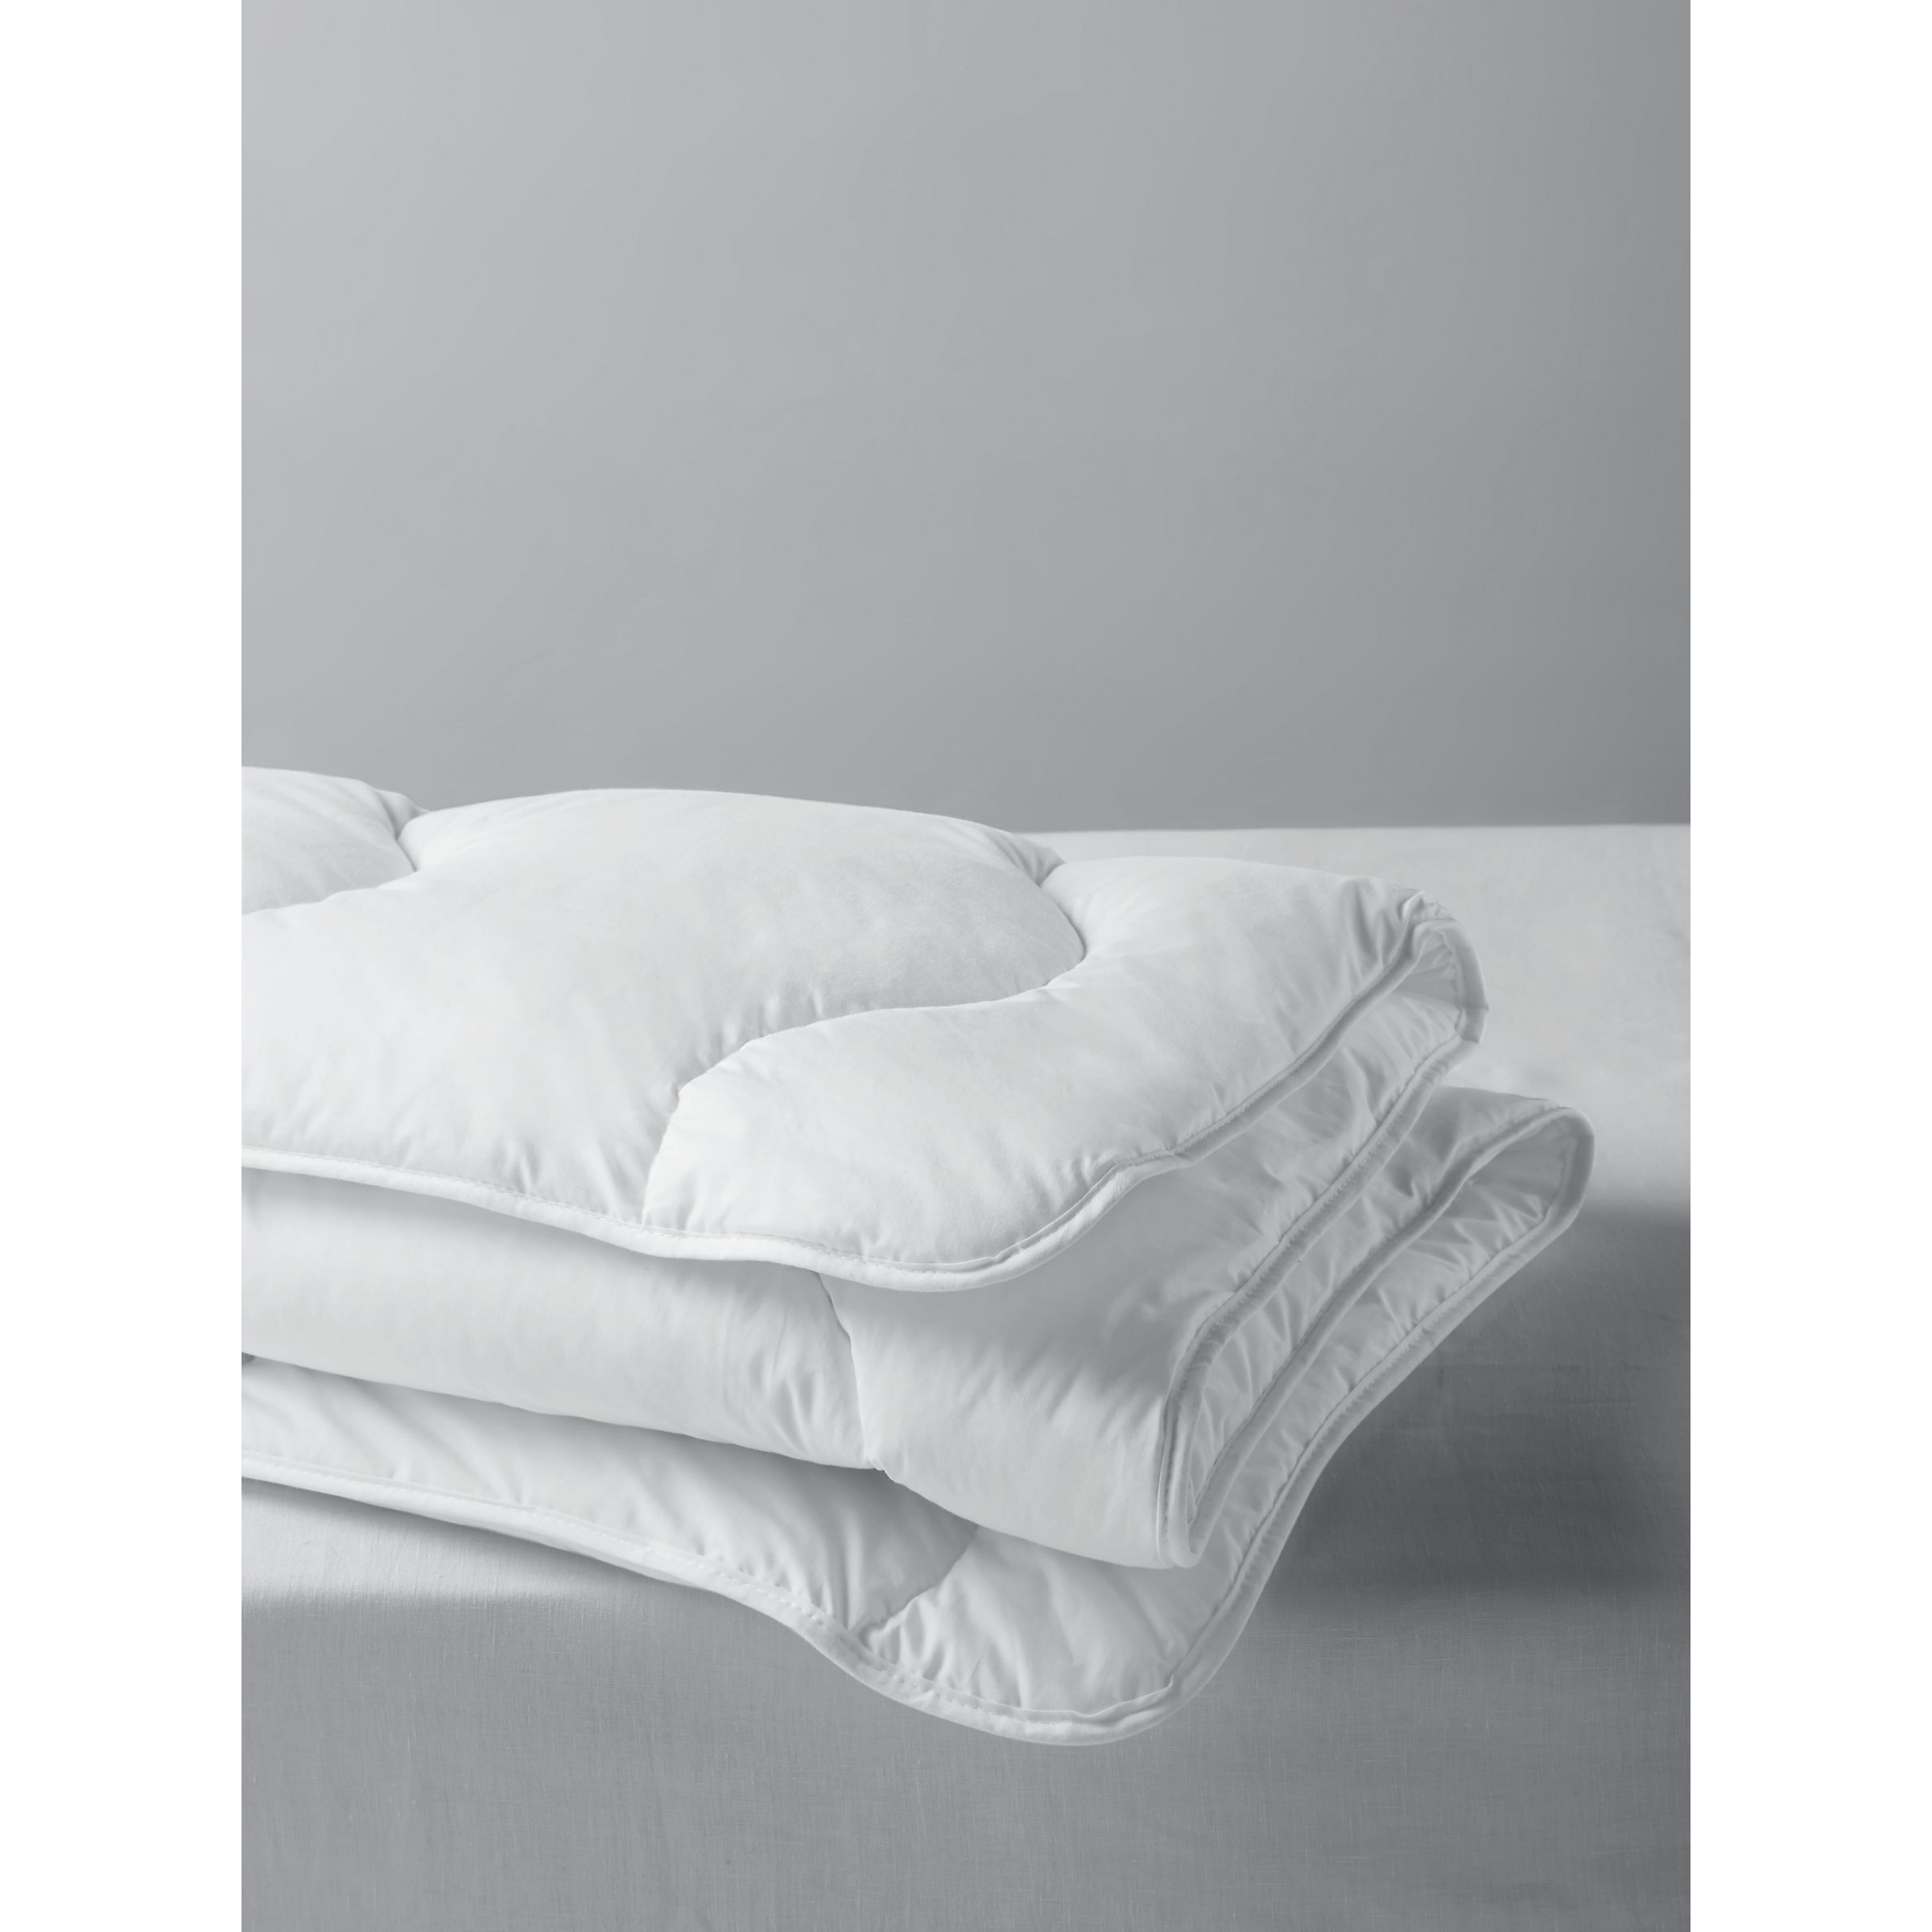 John Lewis Synthetic Collection Temperature Regulating 3-in-1 Duvet with 37.5® Technology, 13.5 Tog (4.5 + 9 Tog)